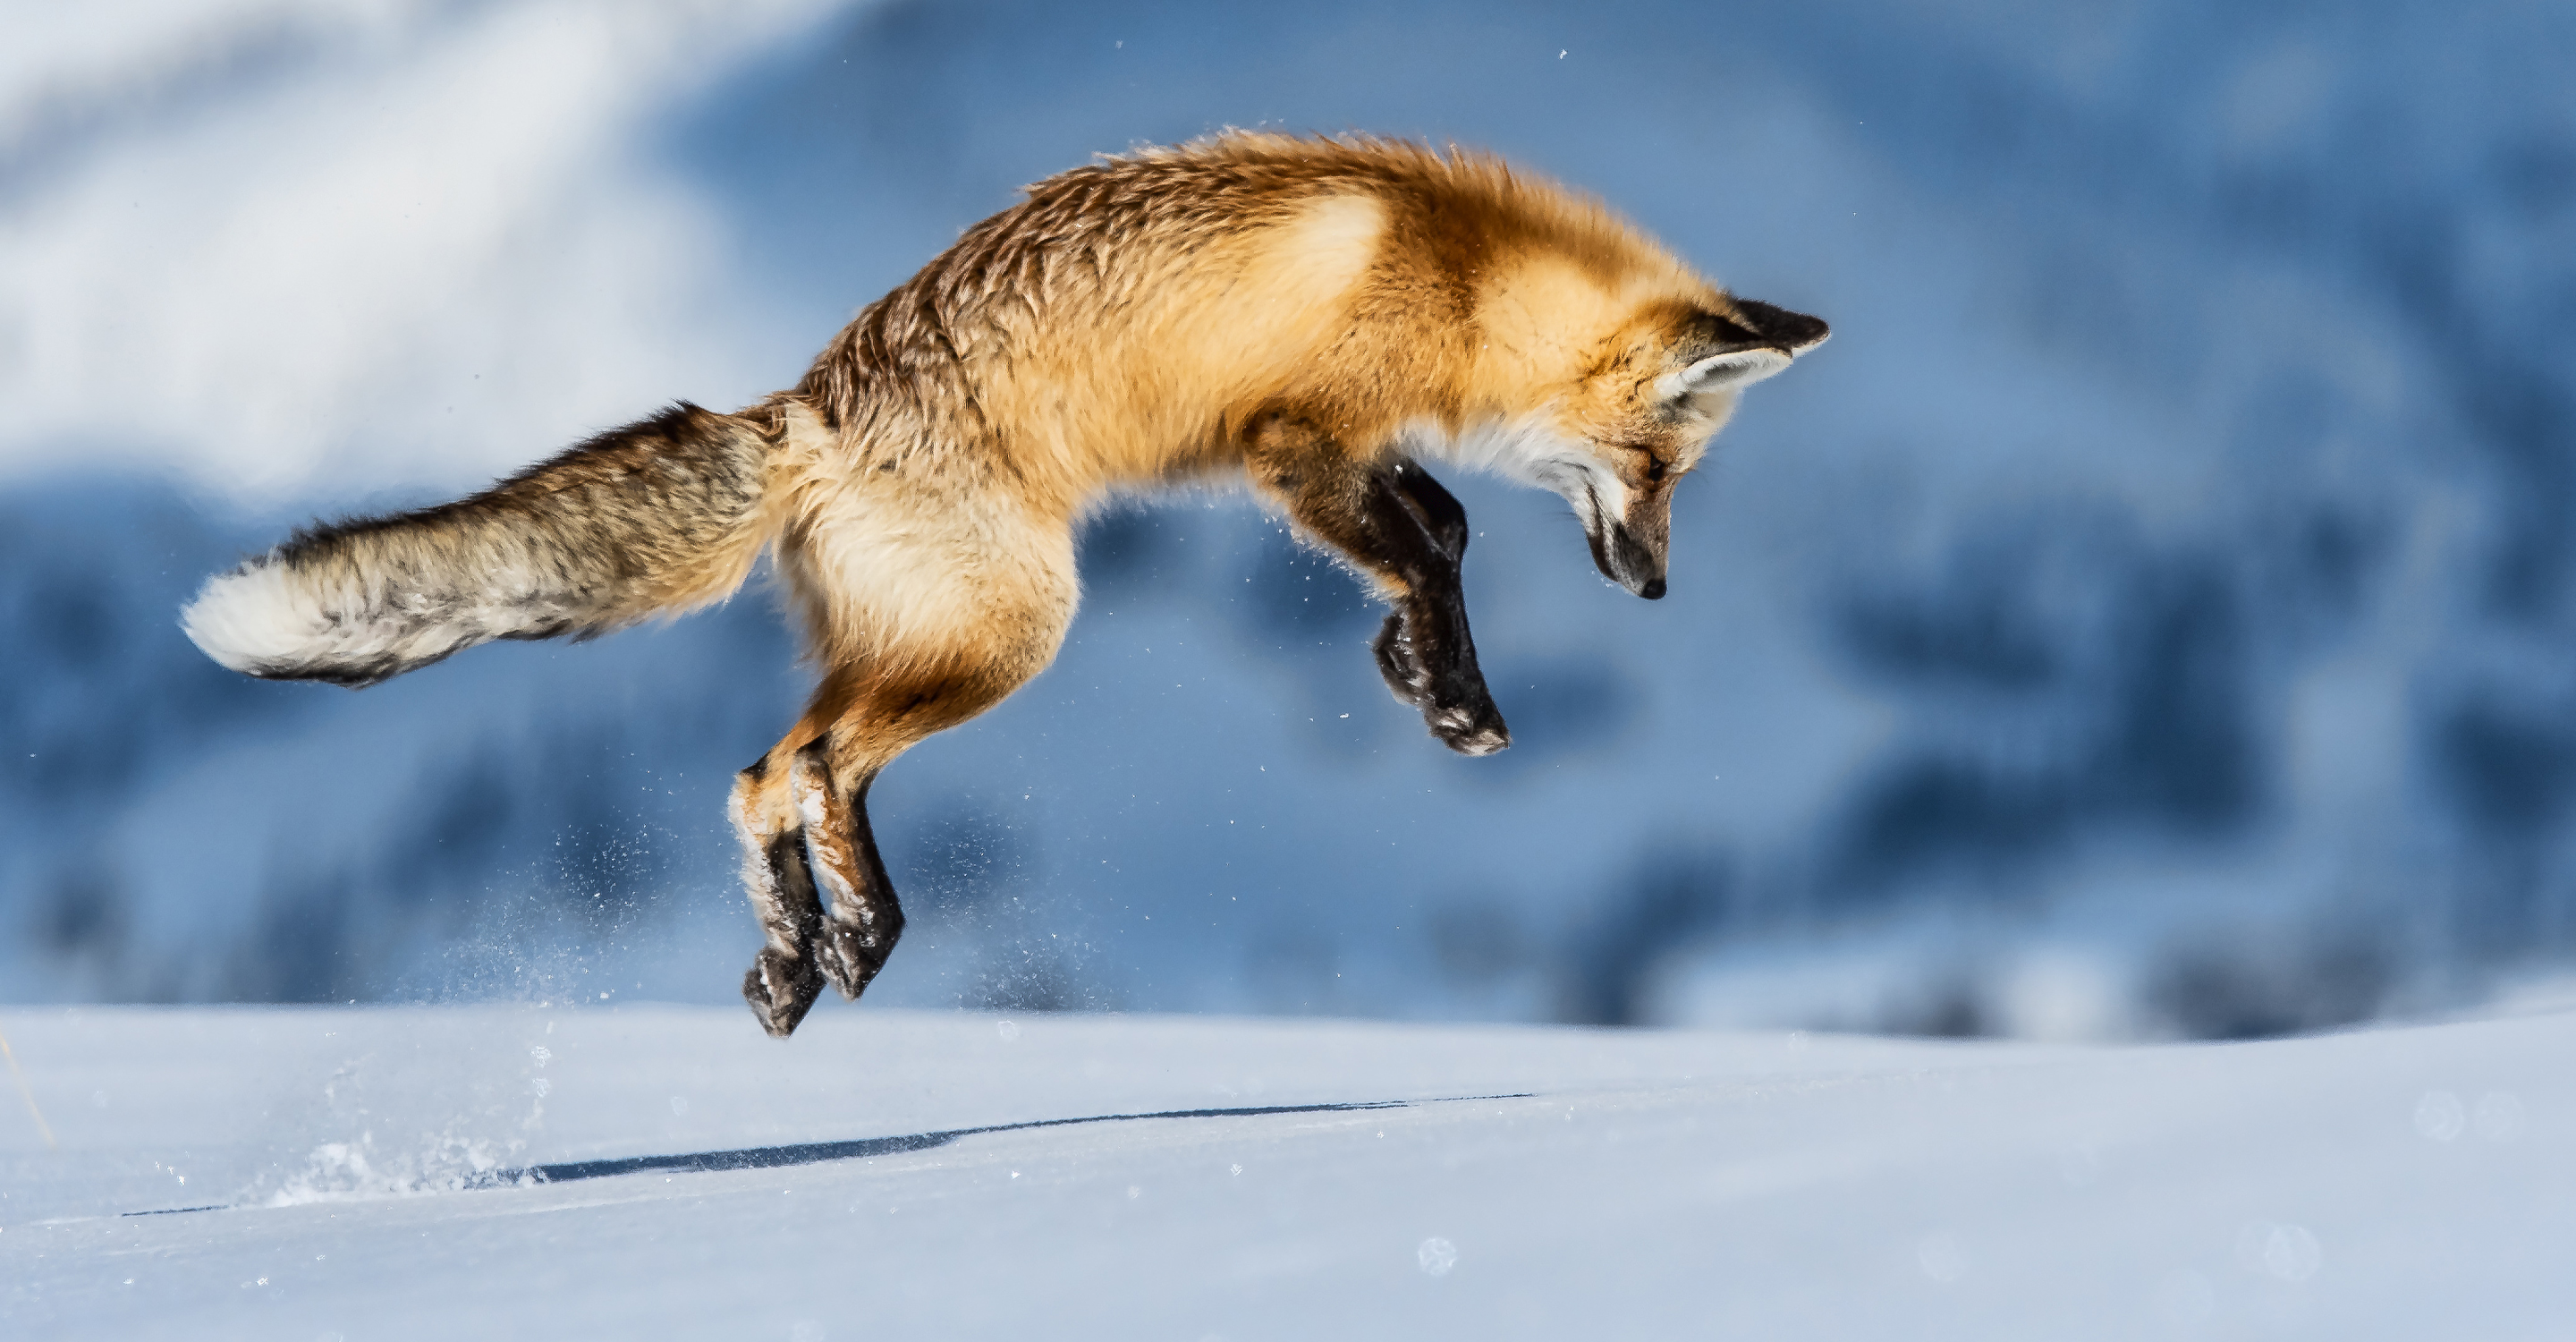 A red fox jumps as it's mousing in the snow in the Hayden Valley of Yellowstone National Park, United States